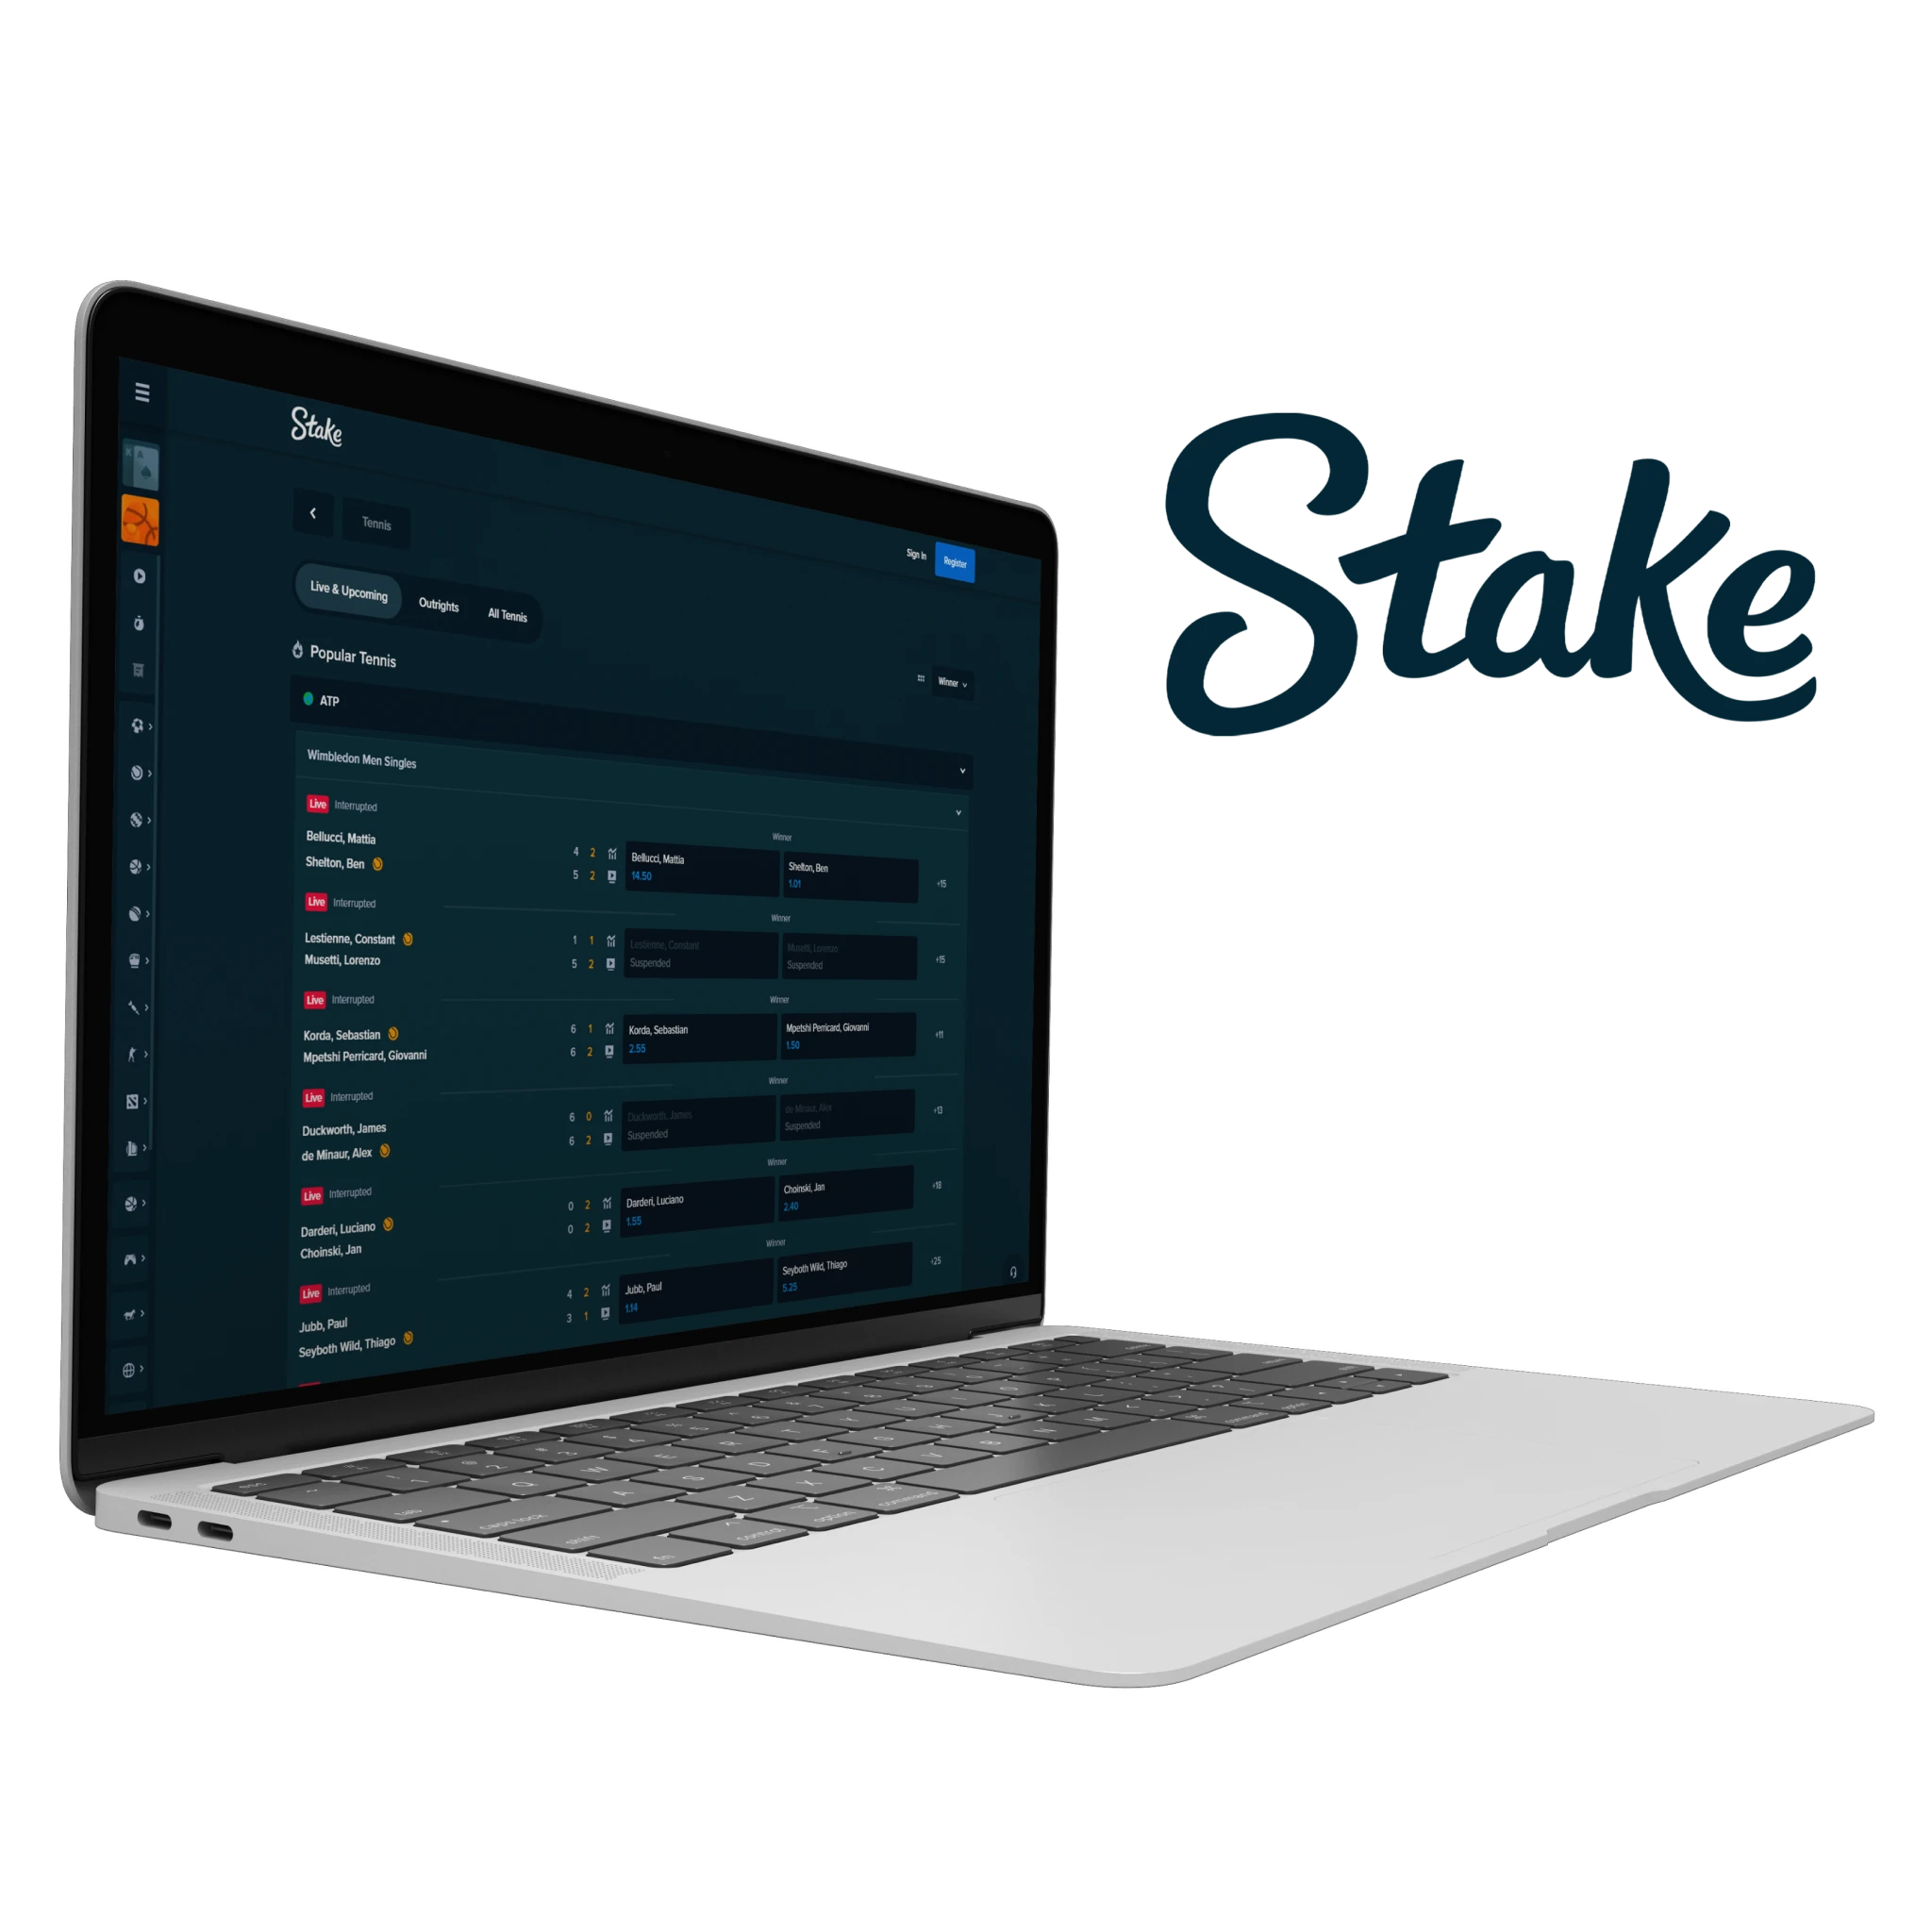 Stake provides all the tools you need for successful tennis betting by providing high quality service and support.